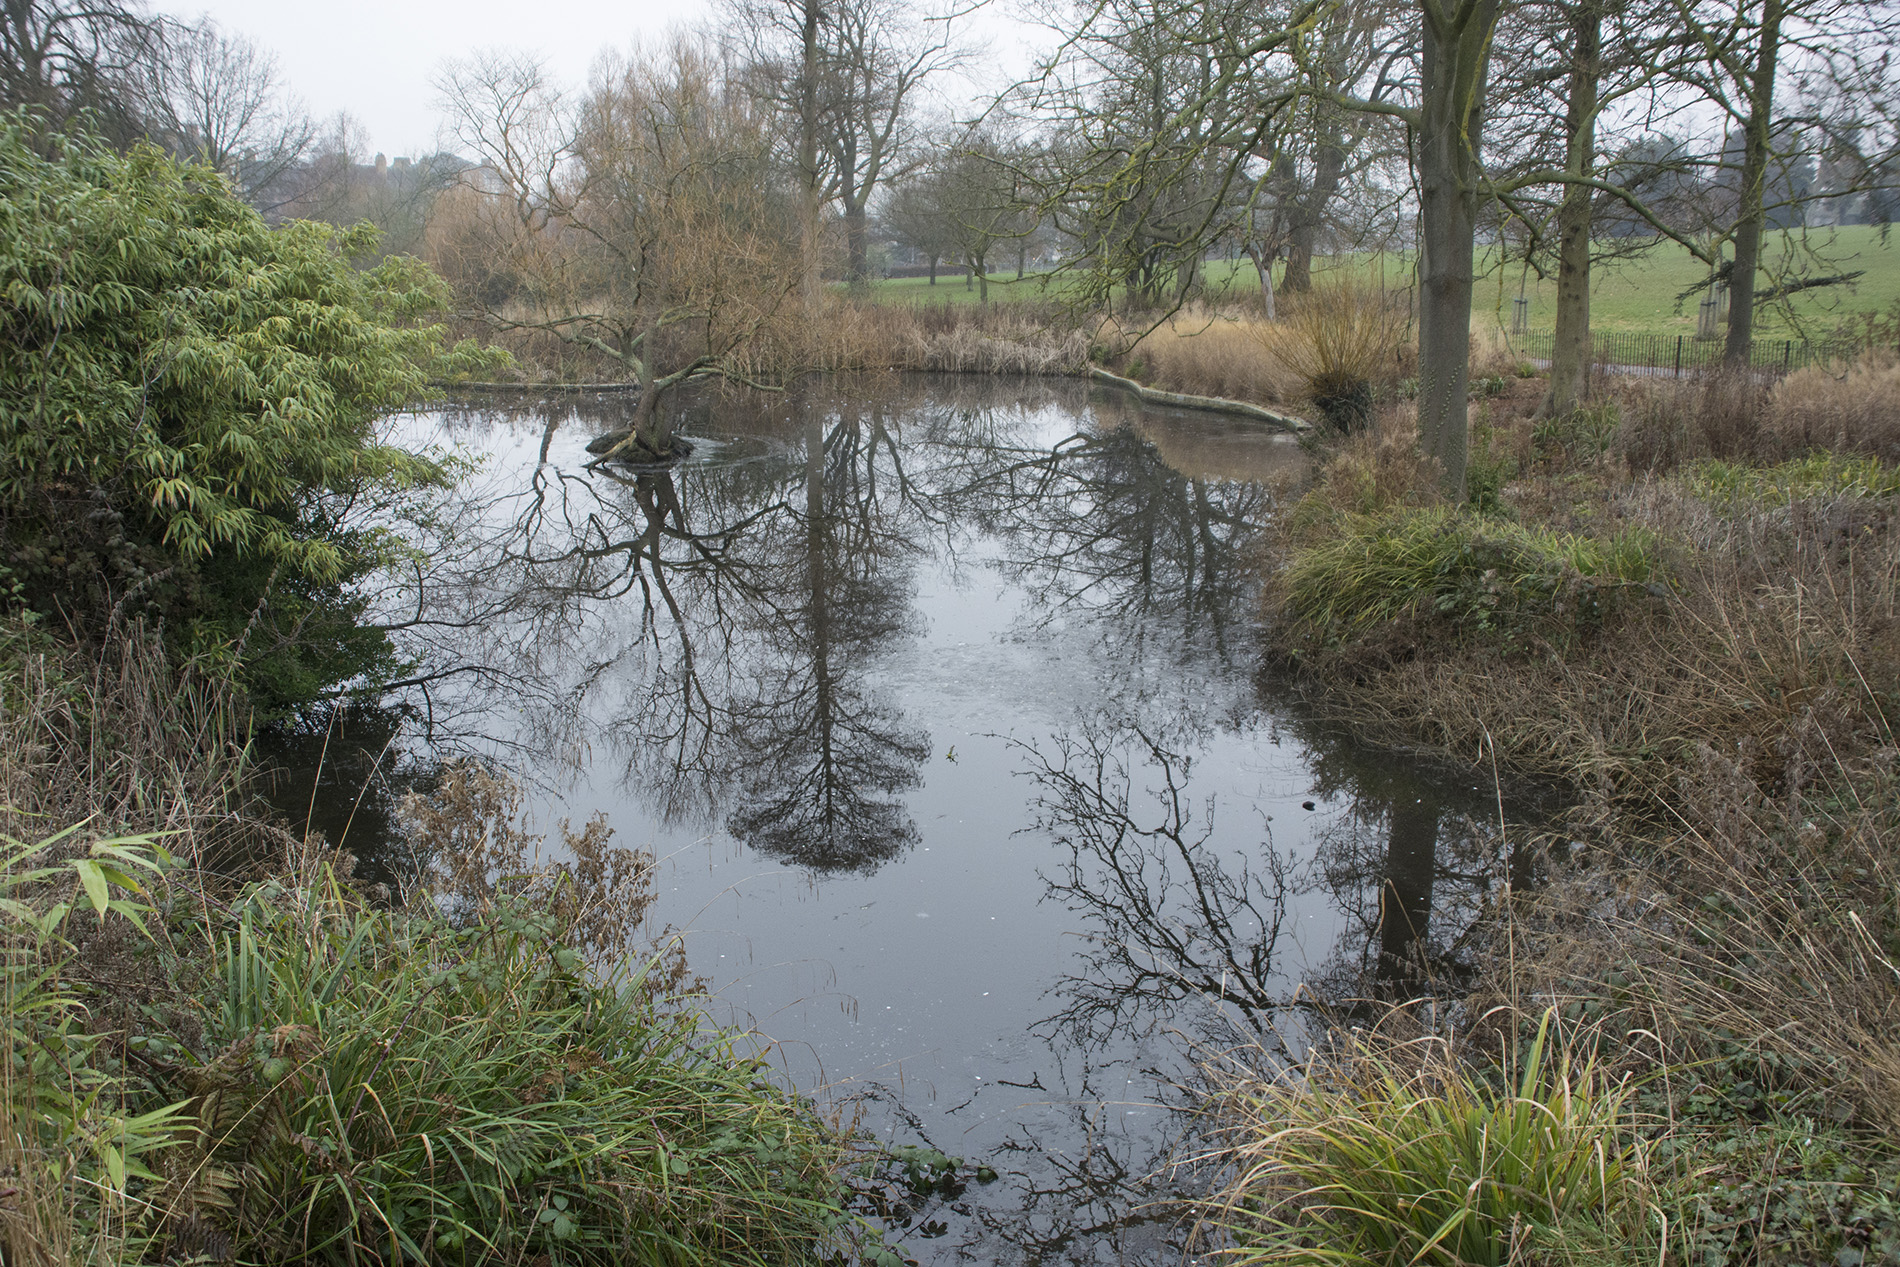 2017-01-25-Lambeth_Brockwell-Park_Landscape_Winter-Icy-Reflections